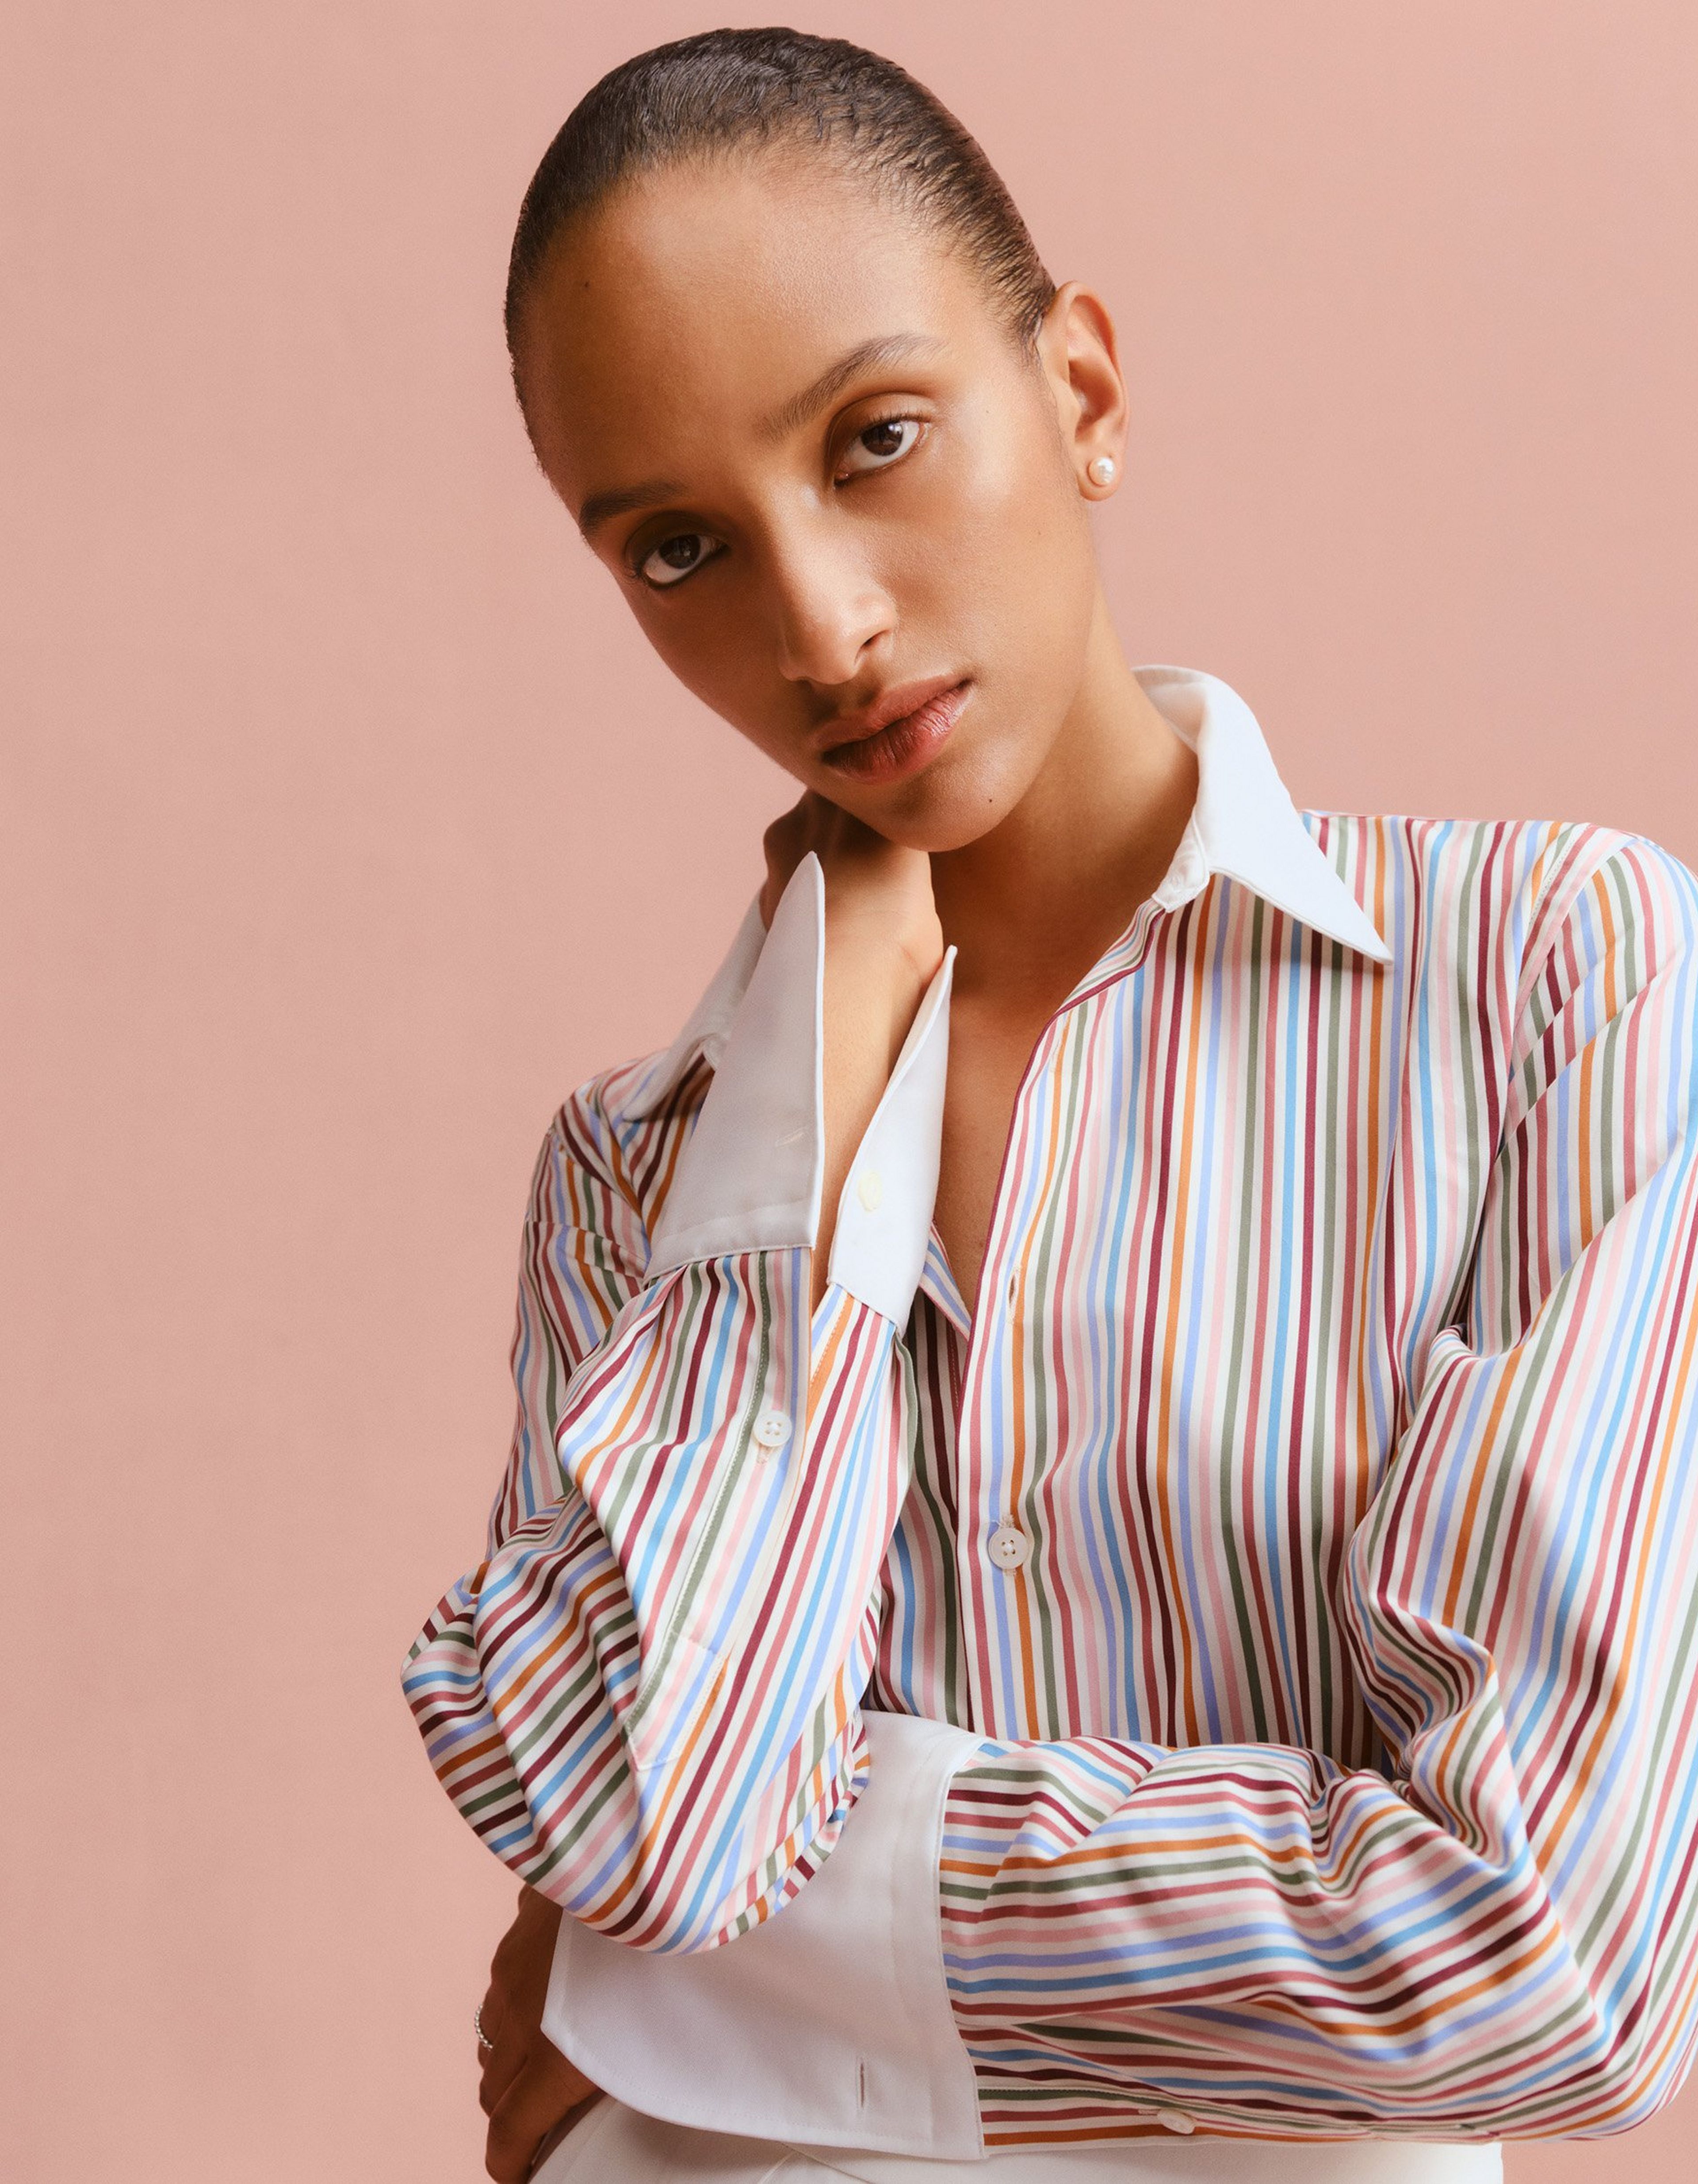 A women wears a Bengal Stripe shirt with contrasting cuffs and collar